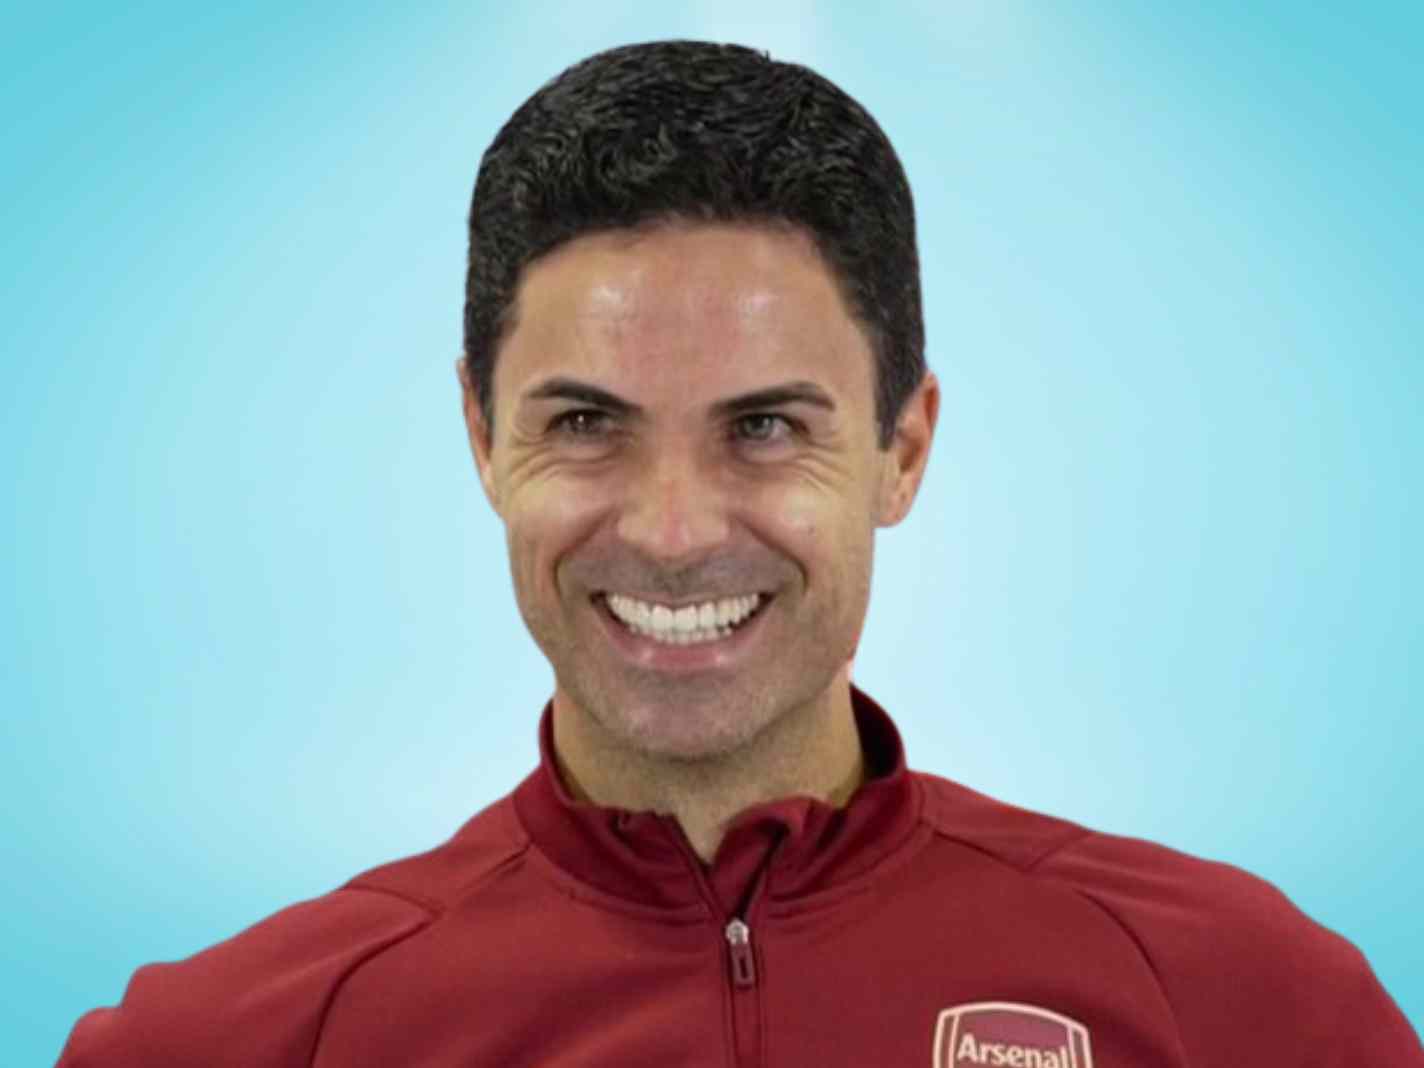 Which 2023 Disco Anthem is the New Mikel Arteta Chant Inspired By?